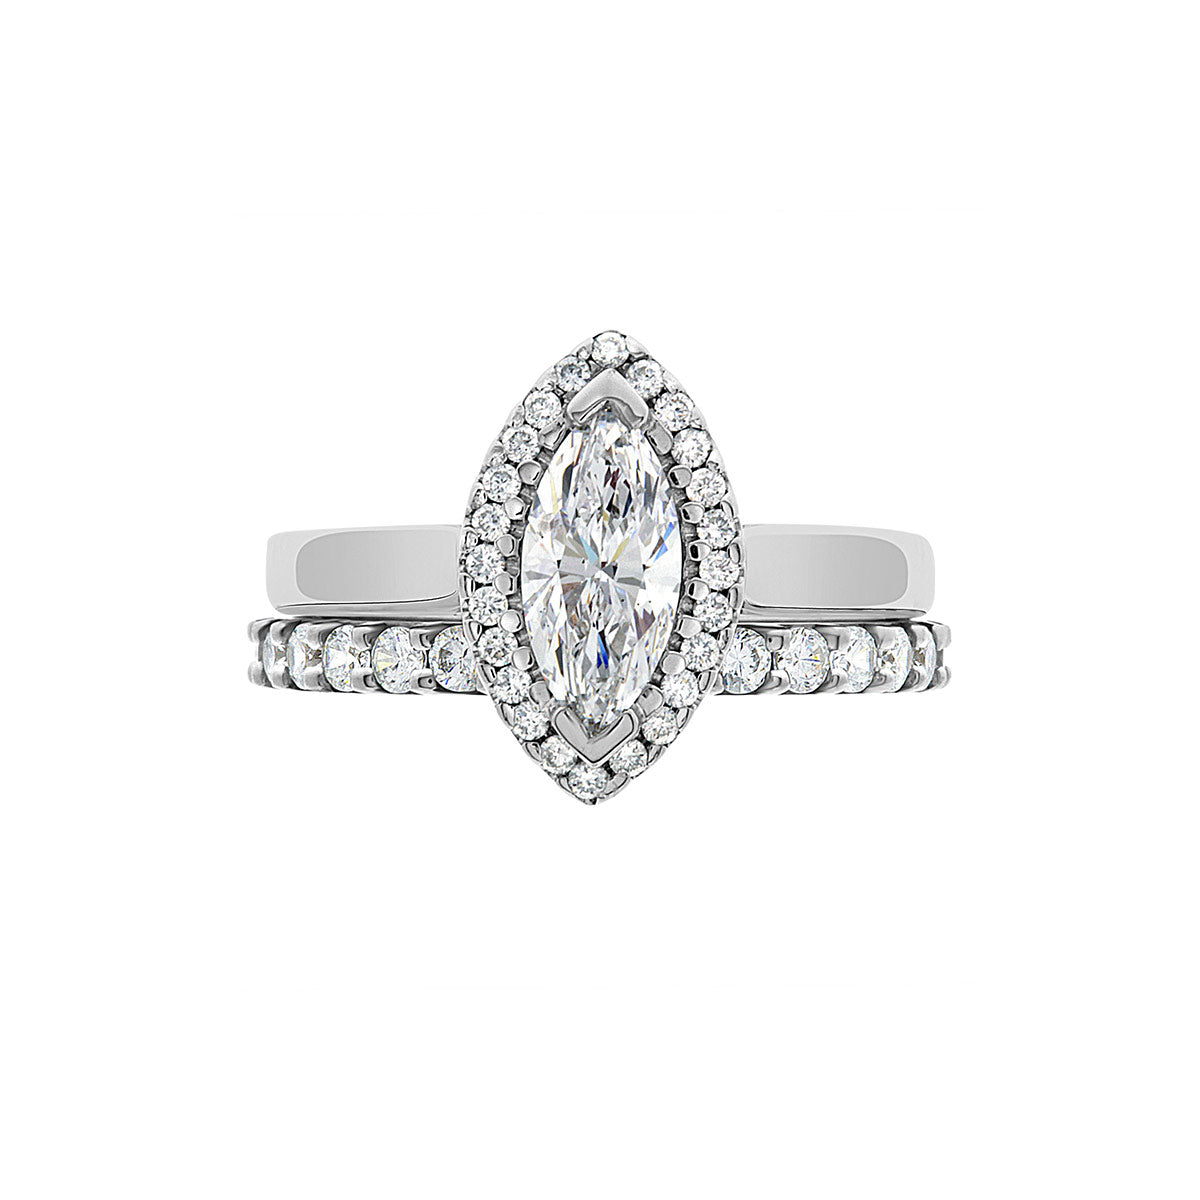 Marquise Cut Halo Ring in platinum pictured with a matching diamond set wedding ring